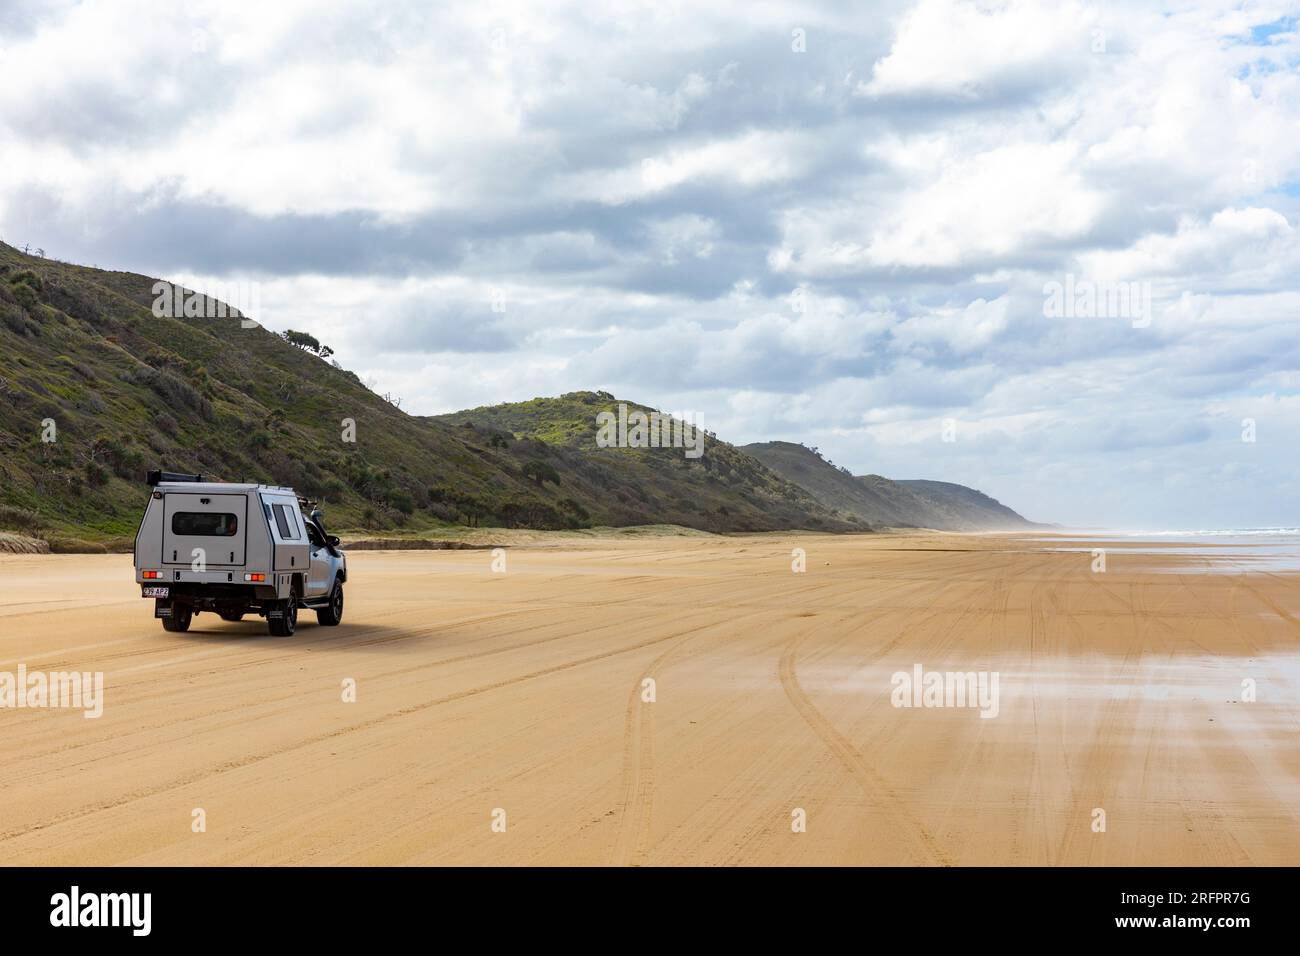 Fraser Island K'gari, 75 mile beach with 4WD 4x4 vehicle driving on the licensed sand road beside the ocean,Queensland,Australia Stock Photo